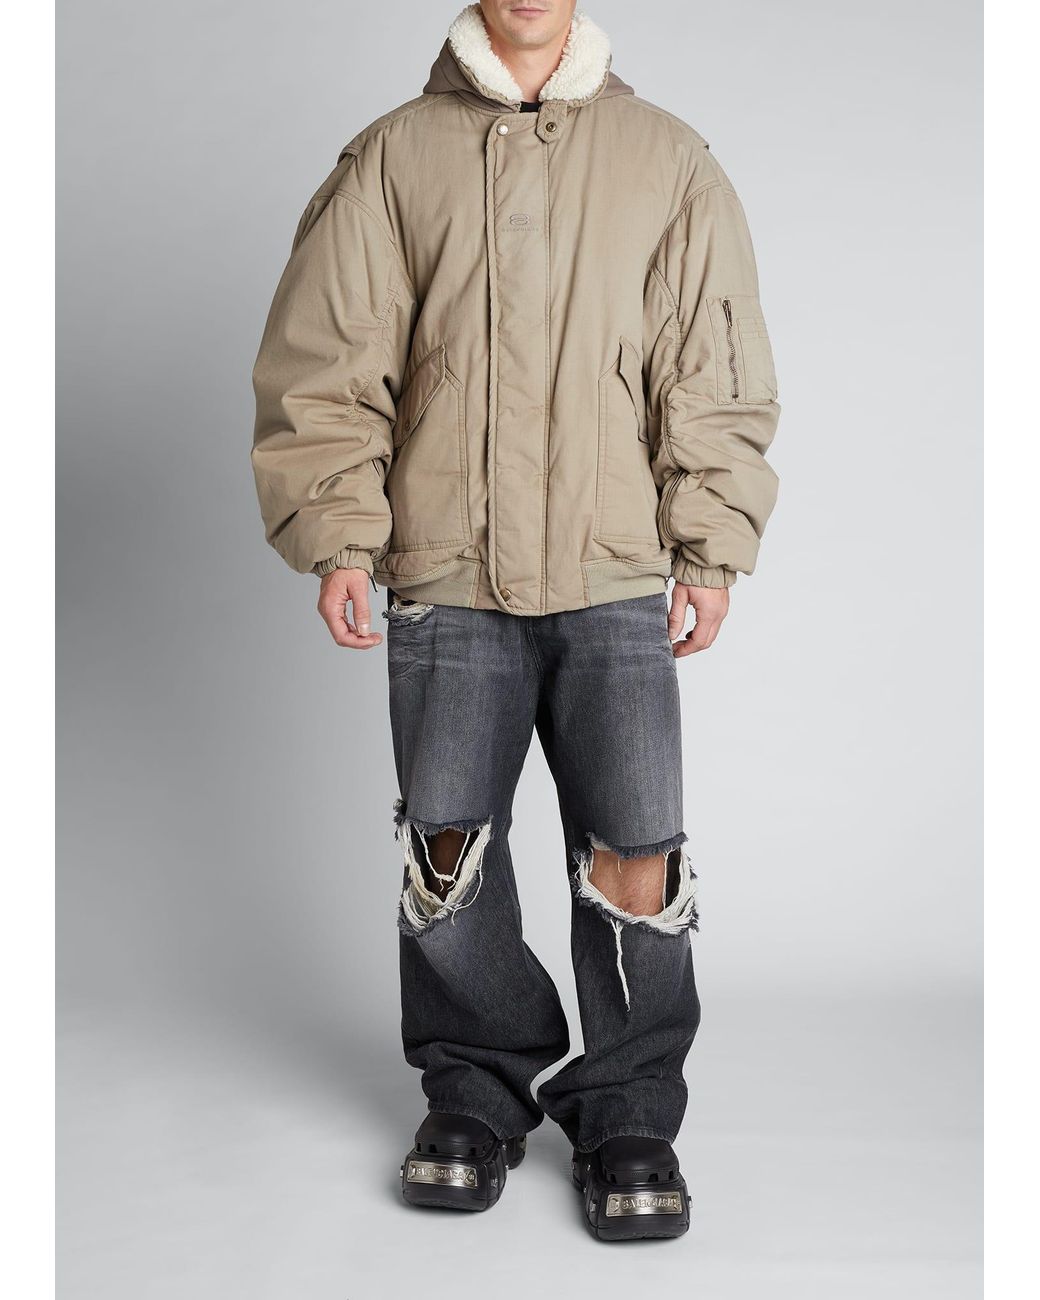 Balenciaga Sherpa-lined Oversized Bomber Jacket in for Men | Lyst